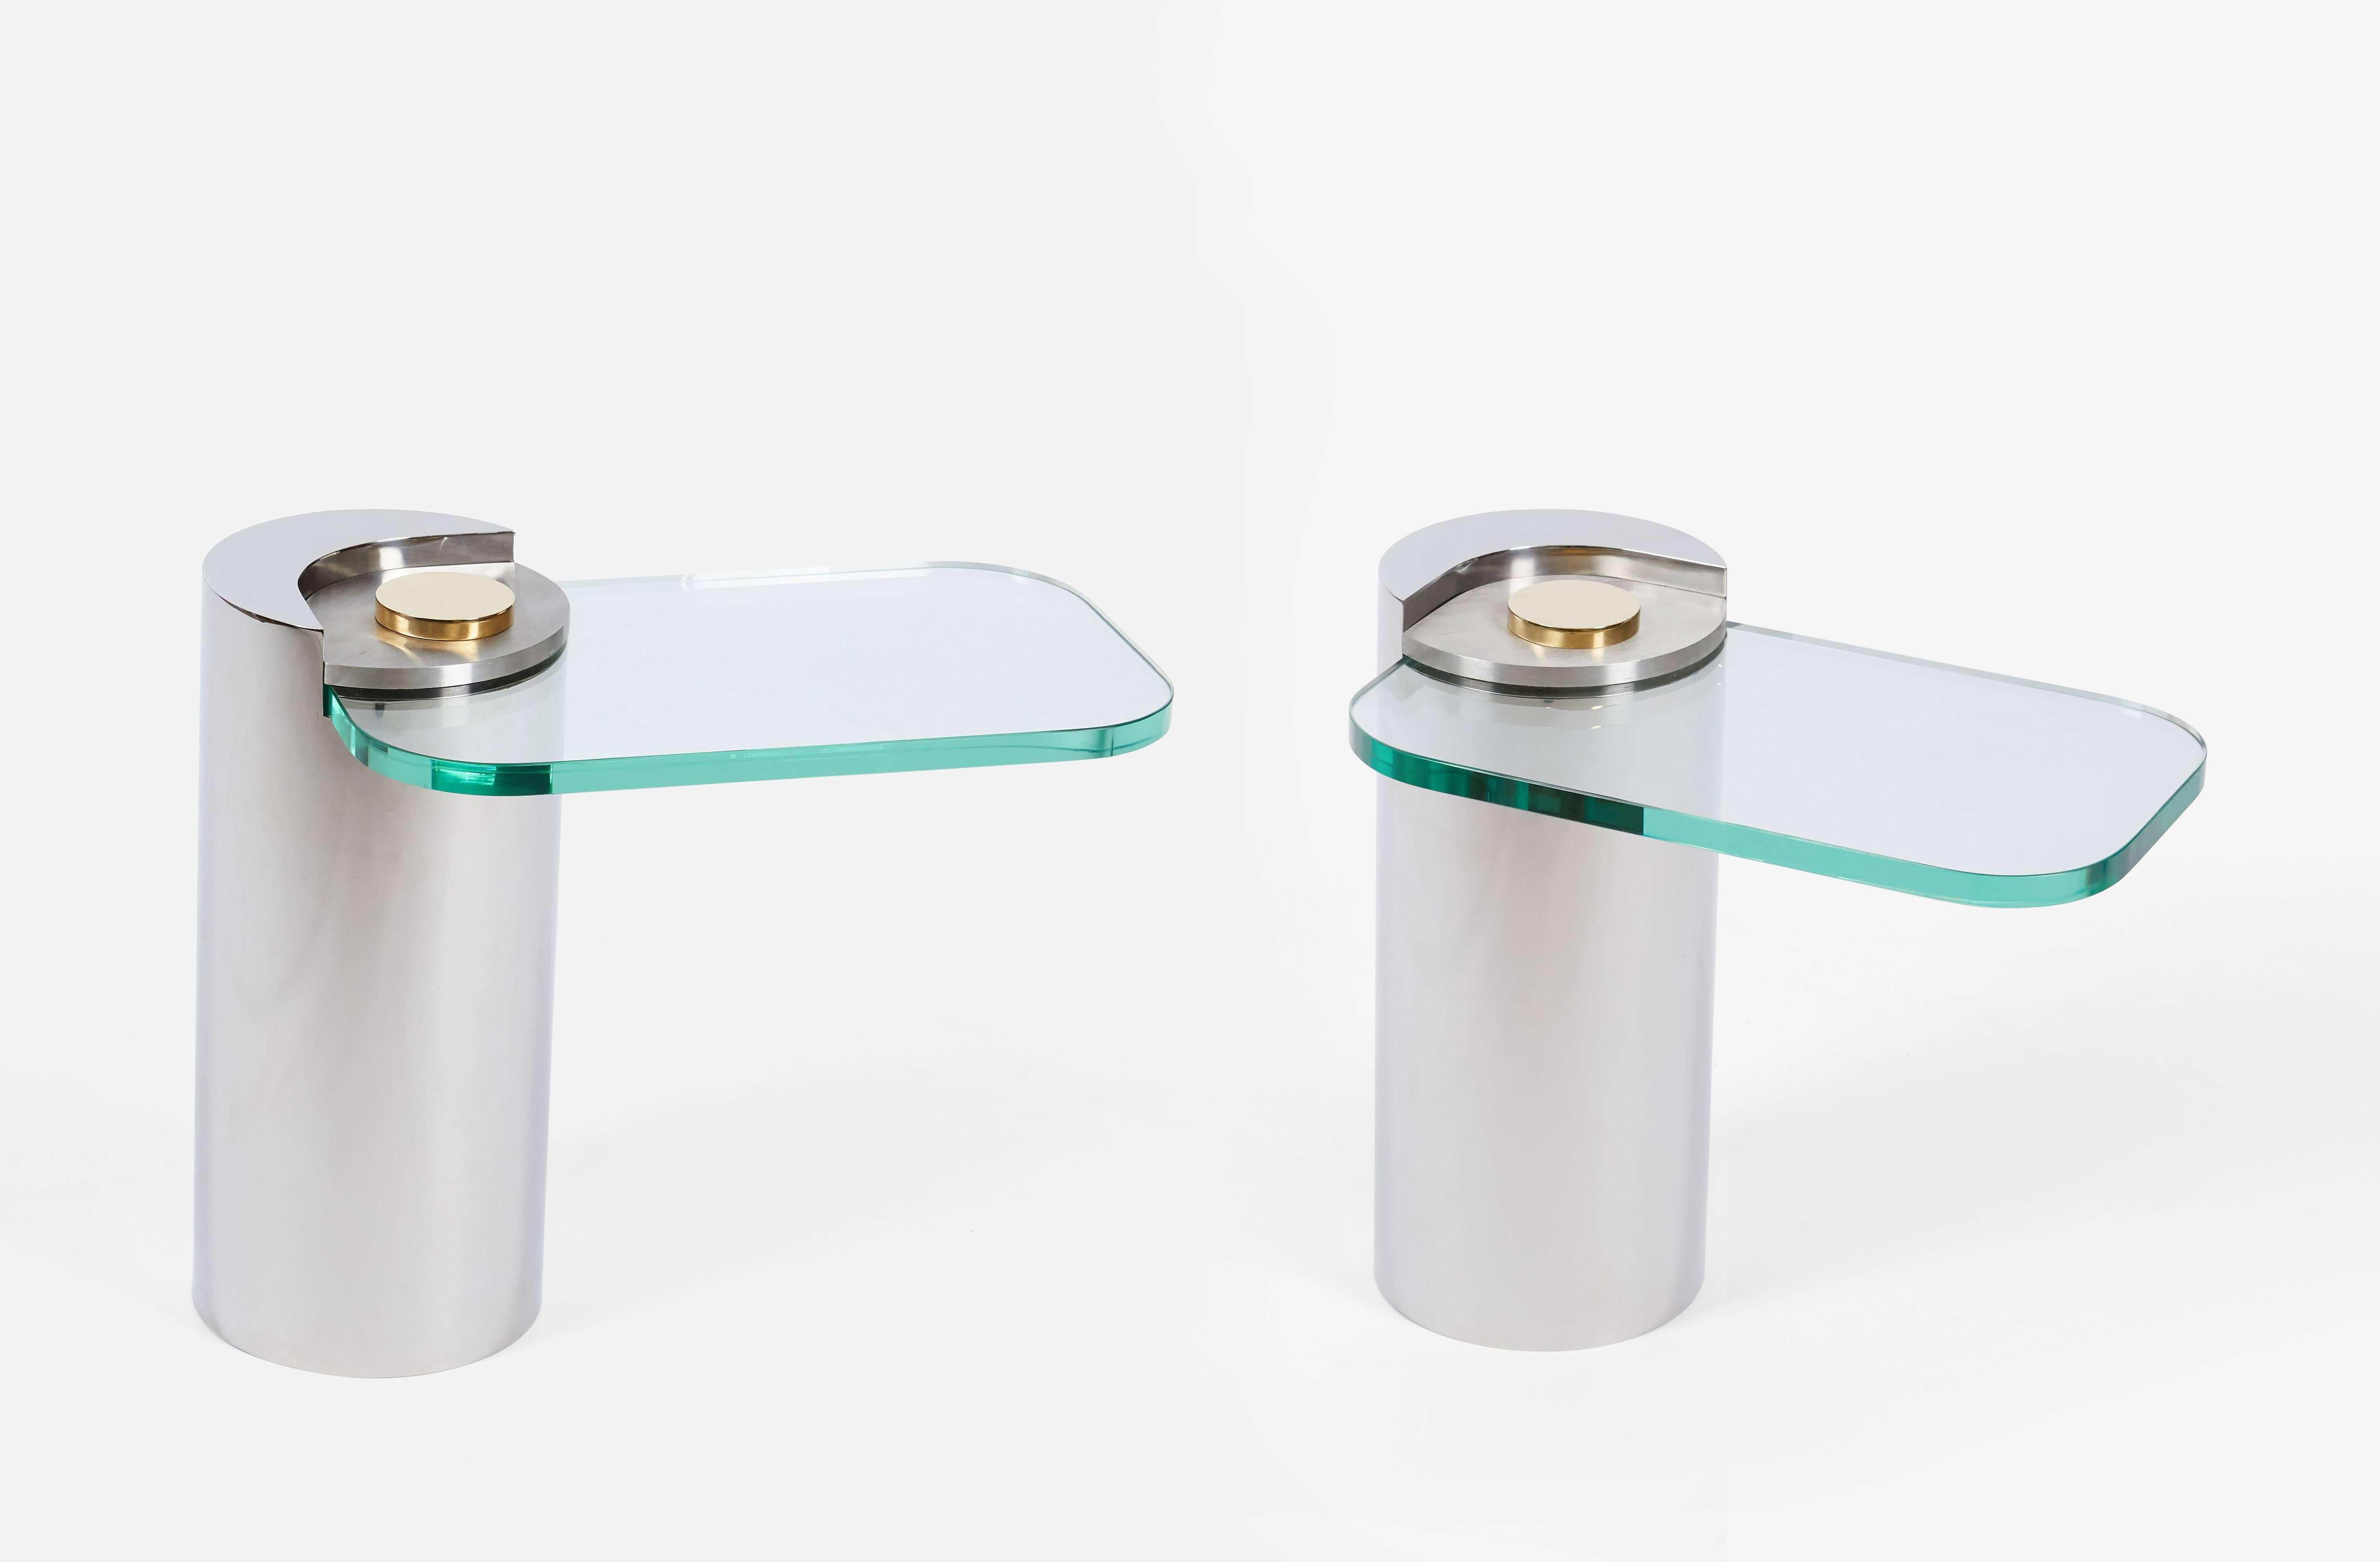 Pair of sculpture leg side tables by Karl Springer. Mixed metal bases with polished stainless steel bases, brushed stainless top plate, and polished brass finial that holds cantilevered glass in place. New glass, free of scratches.  Price is for